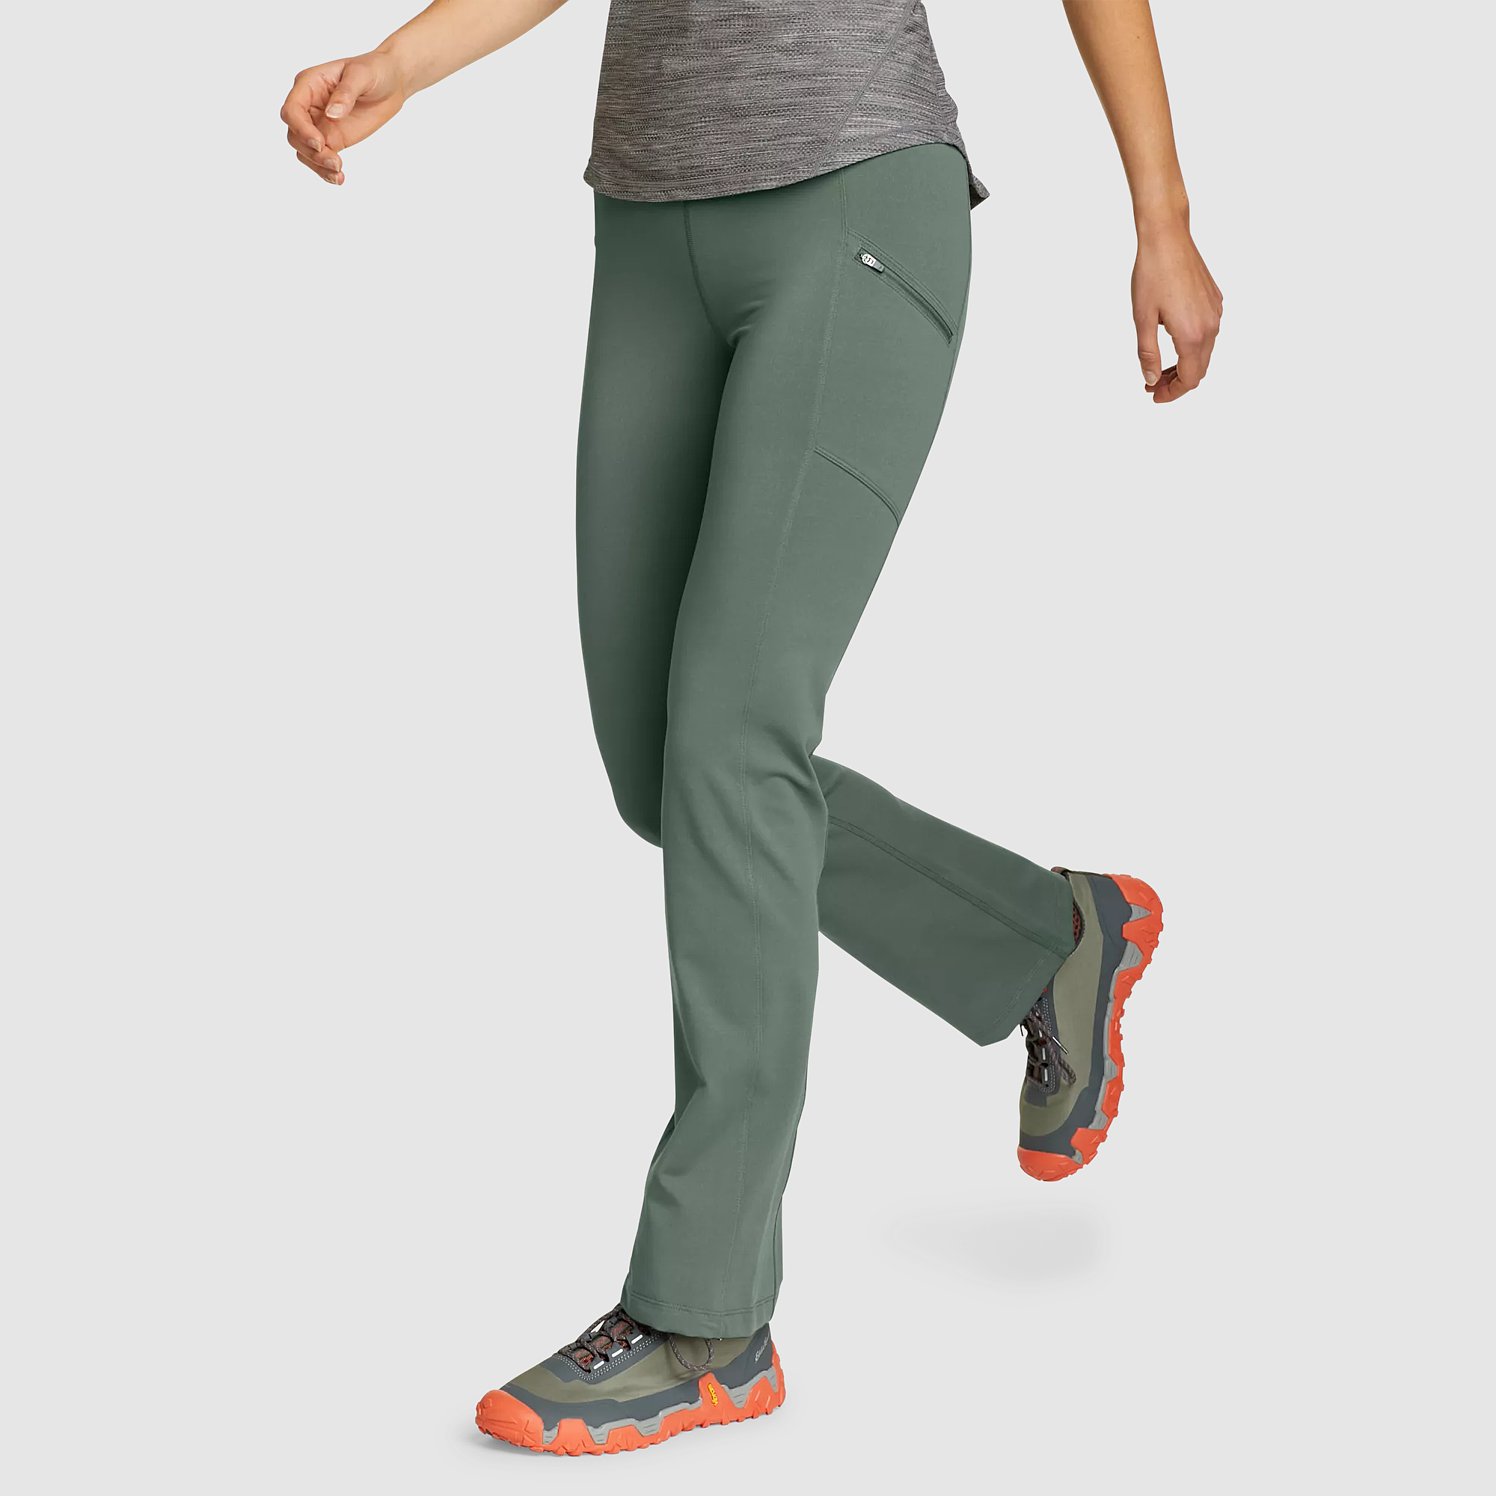 Eddie Bauer Trail Tight Leggings  A Pro Athlete on What to Pack